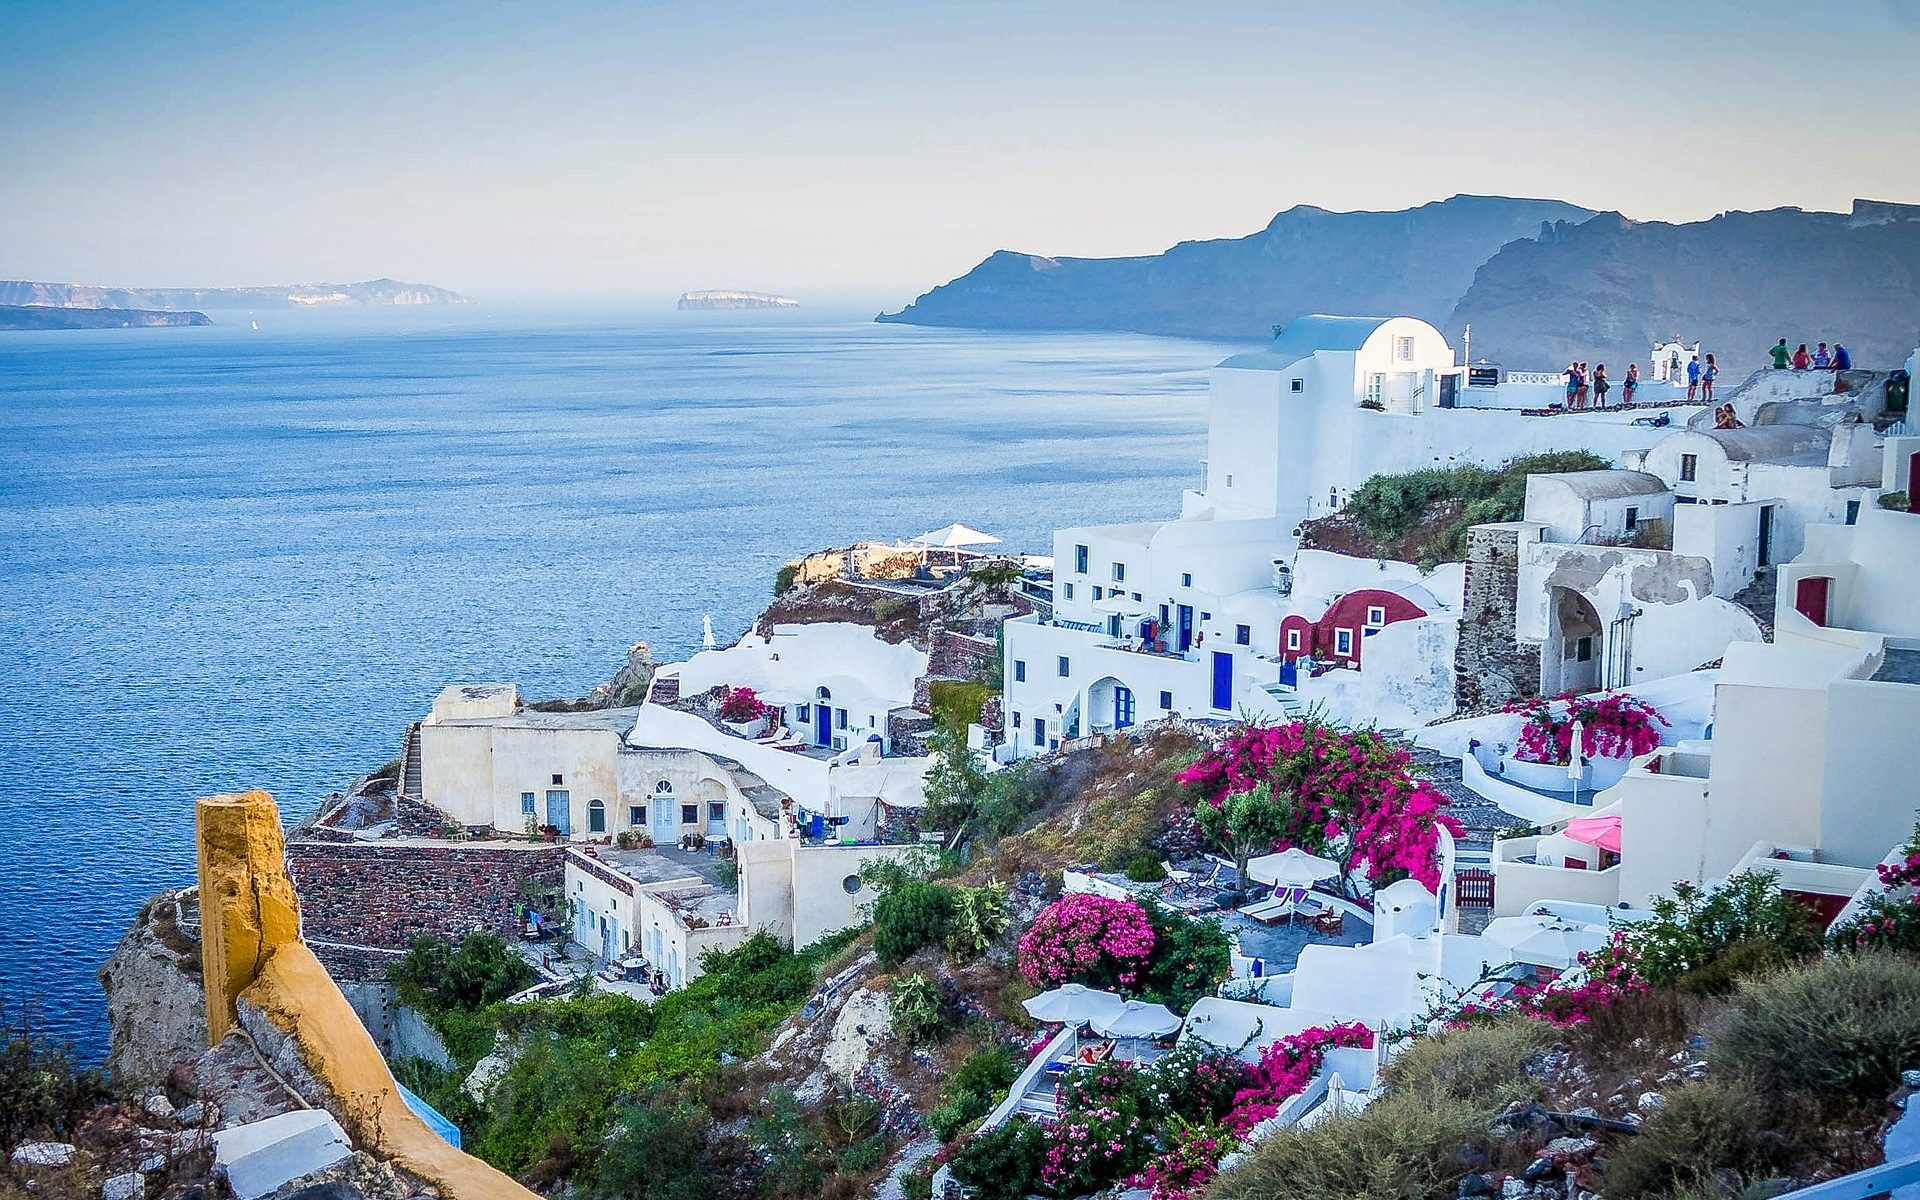 Awe-inspiring architecture, Iconic blue domes, White-washed buildings, Santorini charm, 1920x1200 HD Desktop